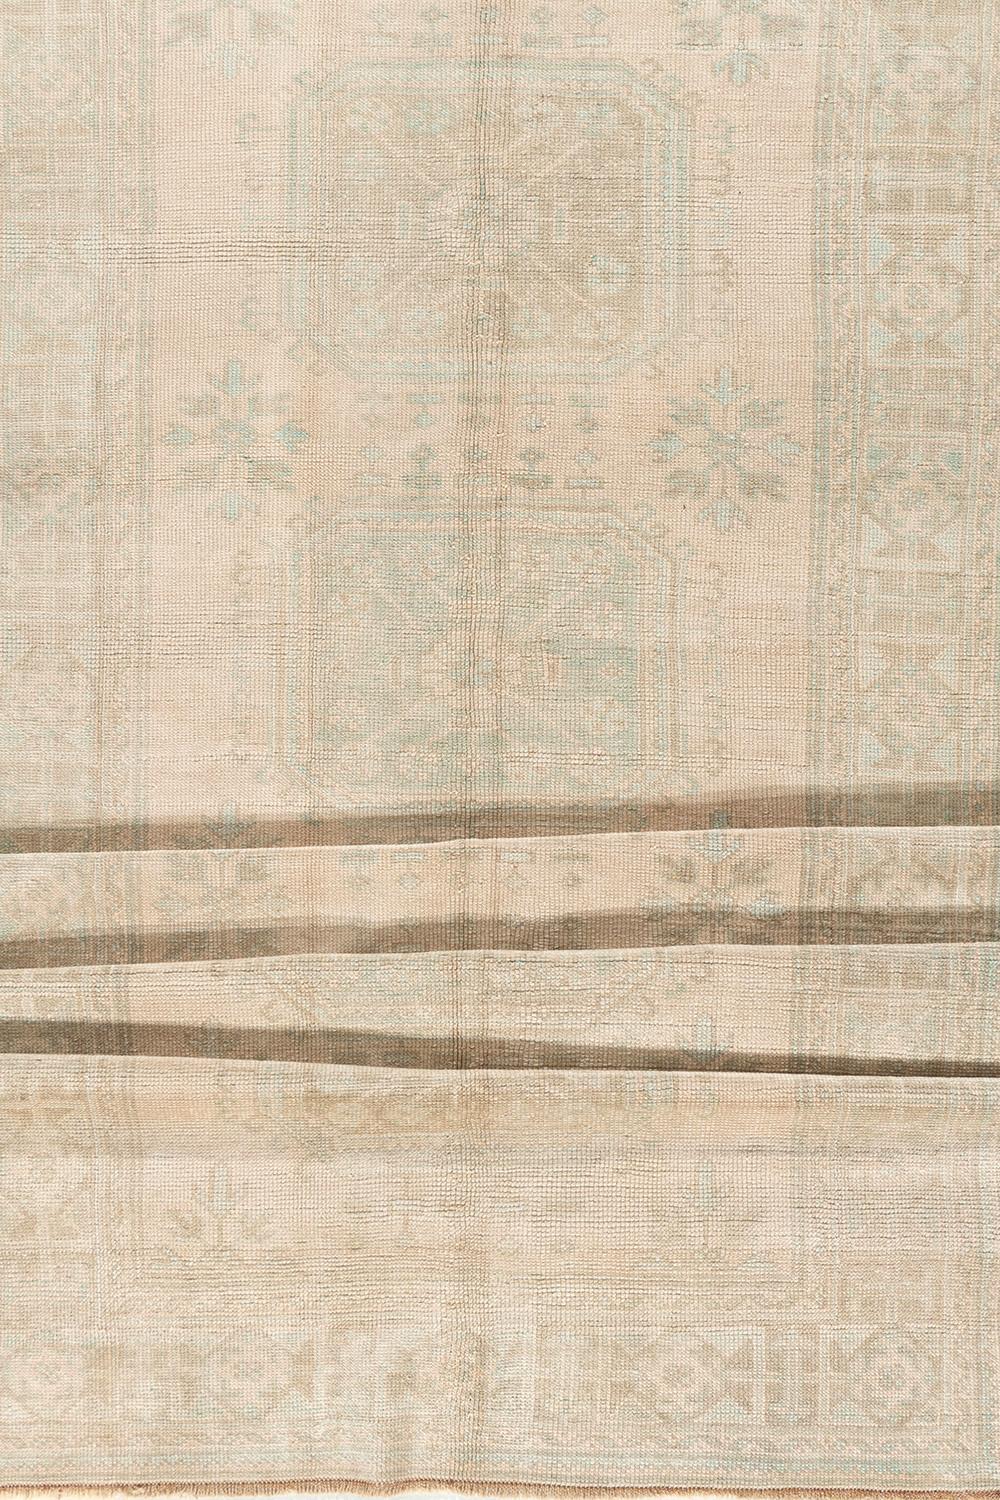 Vintage Subdued Turkish Oushak Runner 4'7 X 11'3. Oushak's are known for their soft palettes combined with eccentric drawing. Oushak in western Turkey has the longest continuous rug weaving history, stretching back at least to the mid-fifteenth